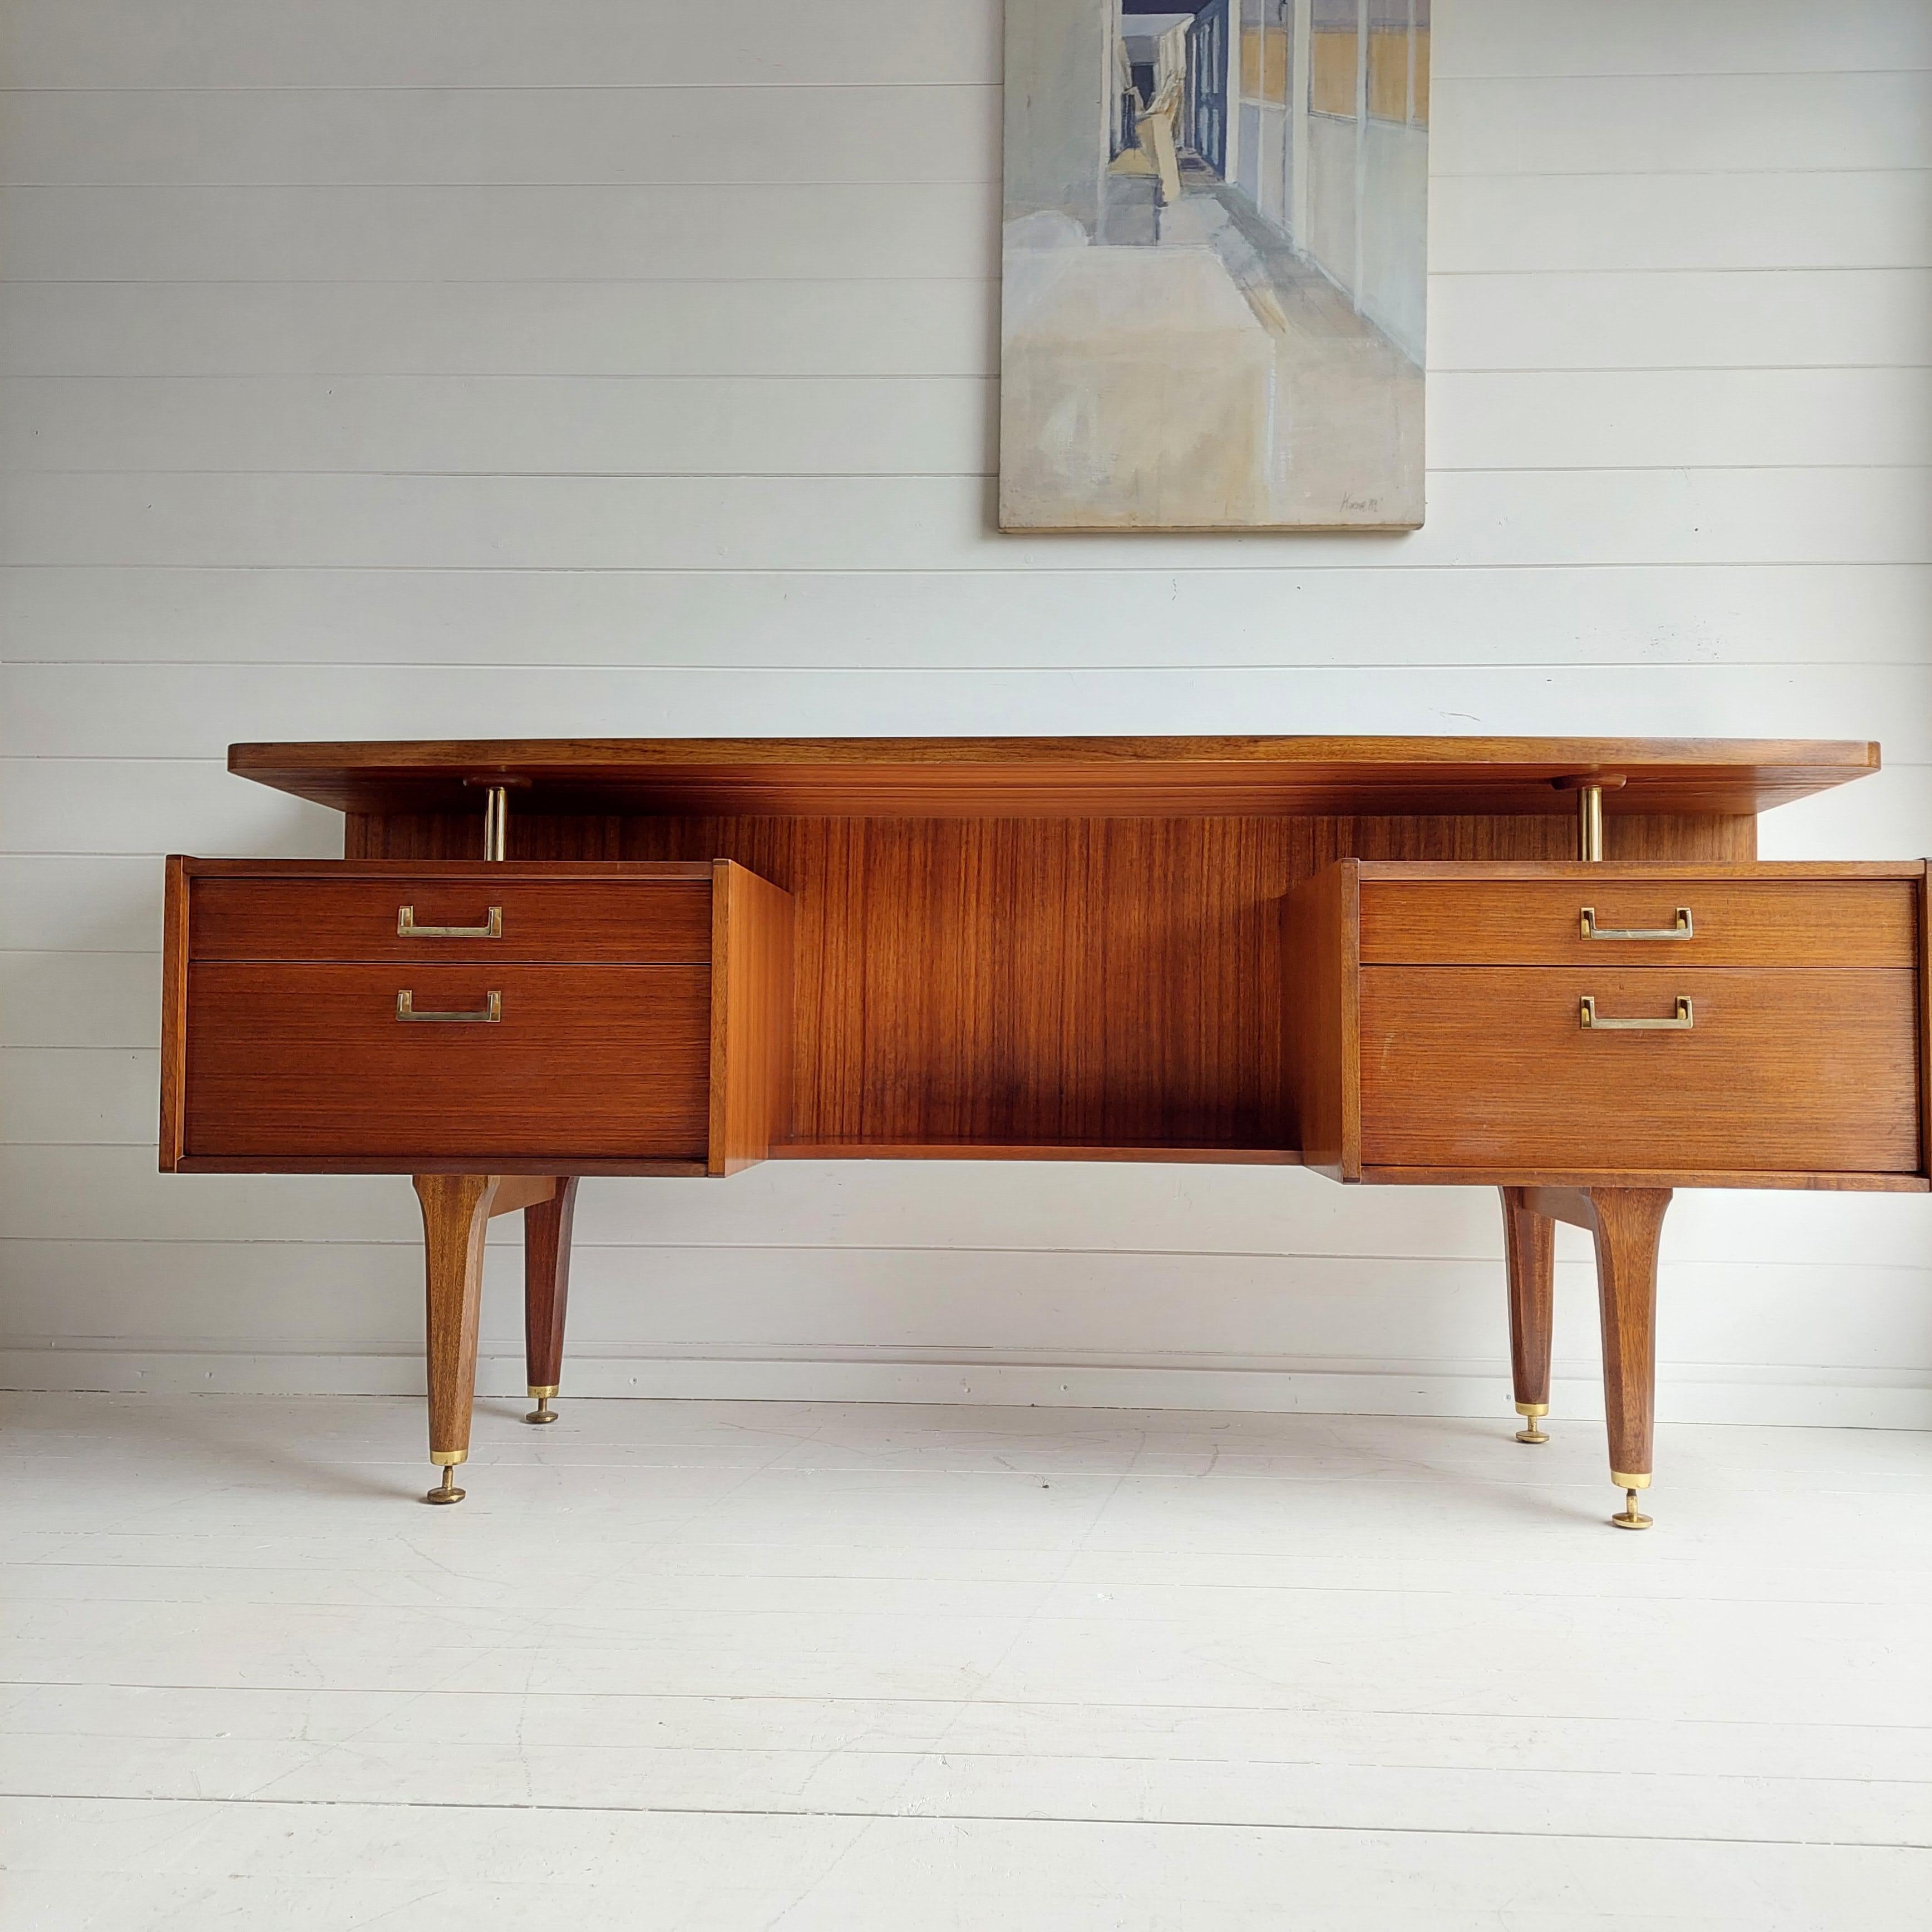 Fabulous vintage G plan E Gomme designed mid century 60s floating desk or dressing table.
Stamped G Plan. Designed by E Gomme for G-Plan
Made of Tola African Mahogany

Excellent build quality with no loose joints wobbles 
Freestanding unit with